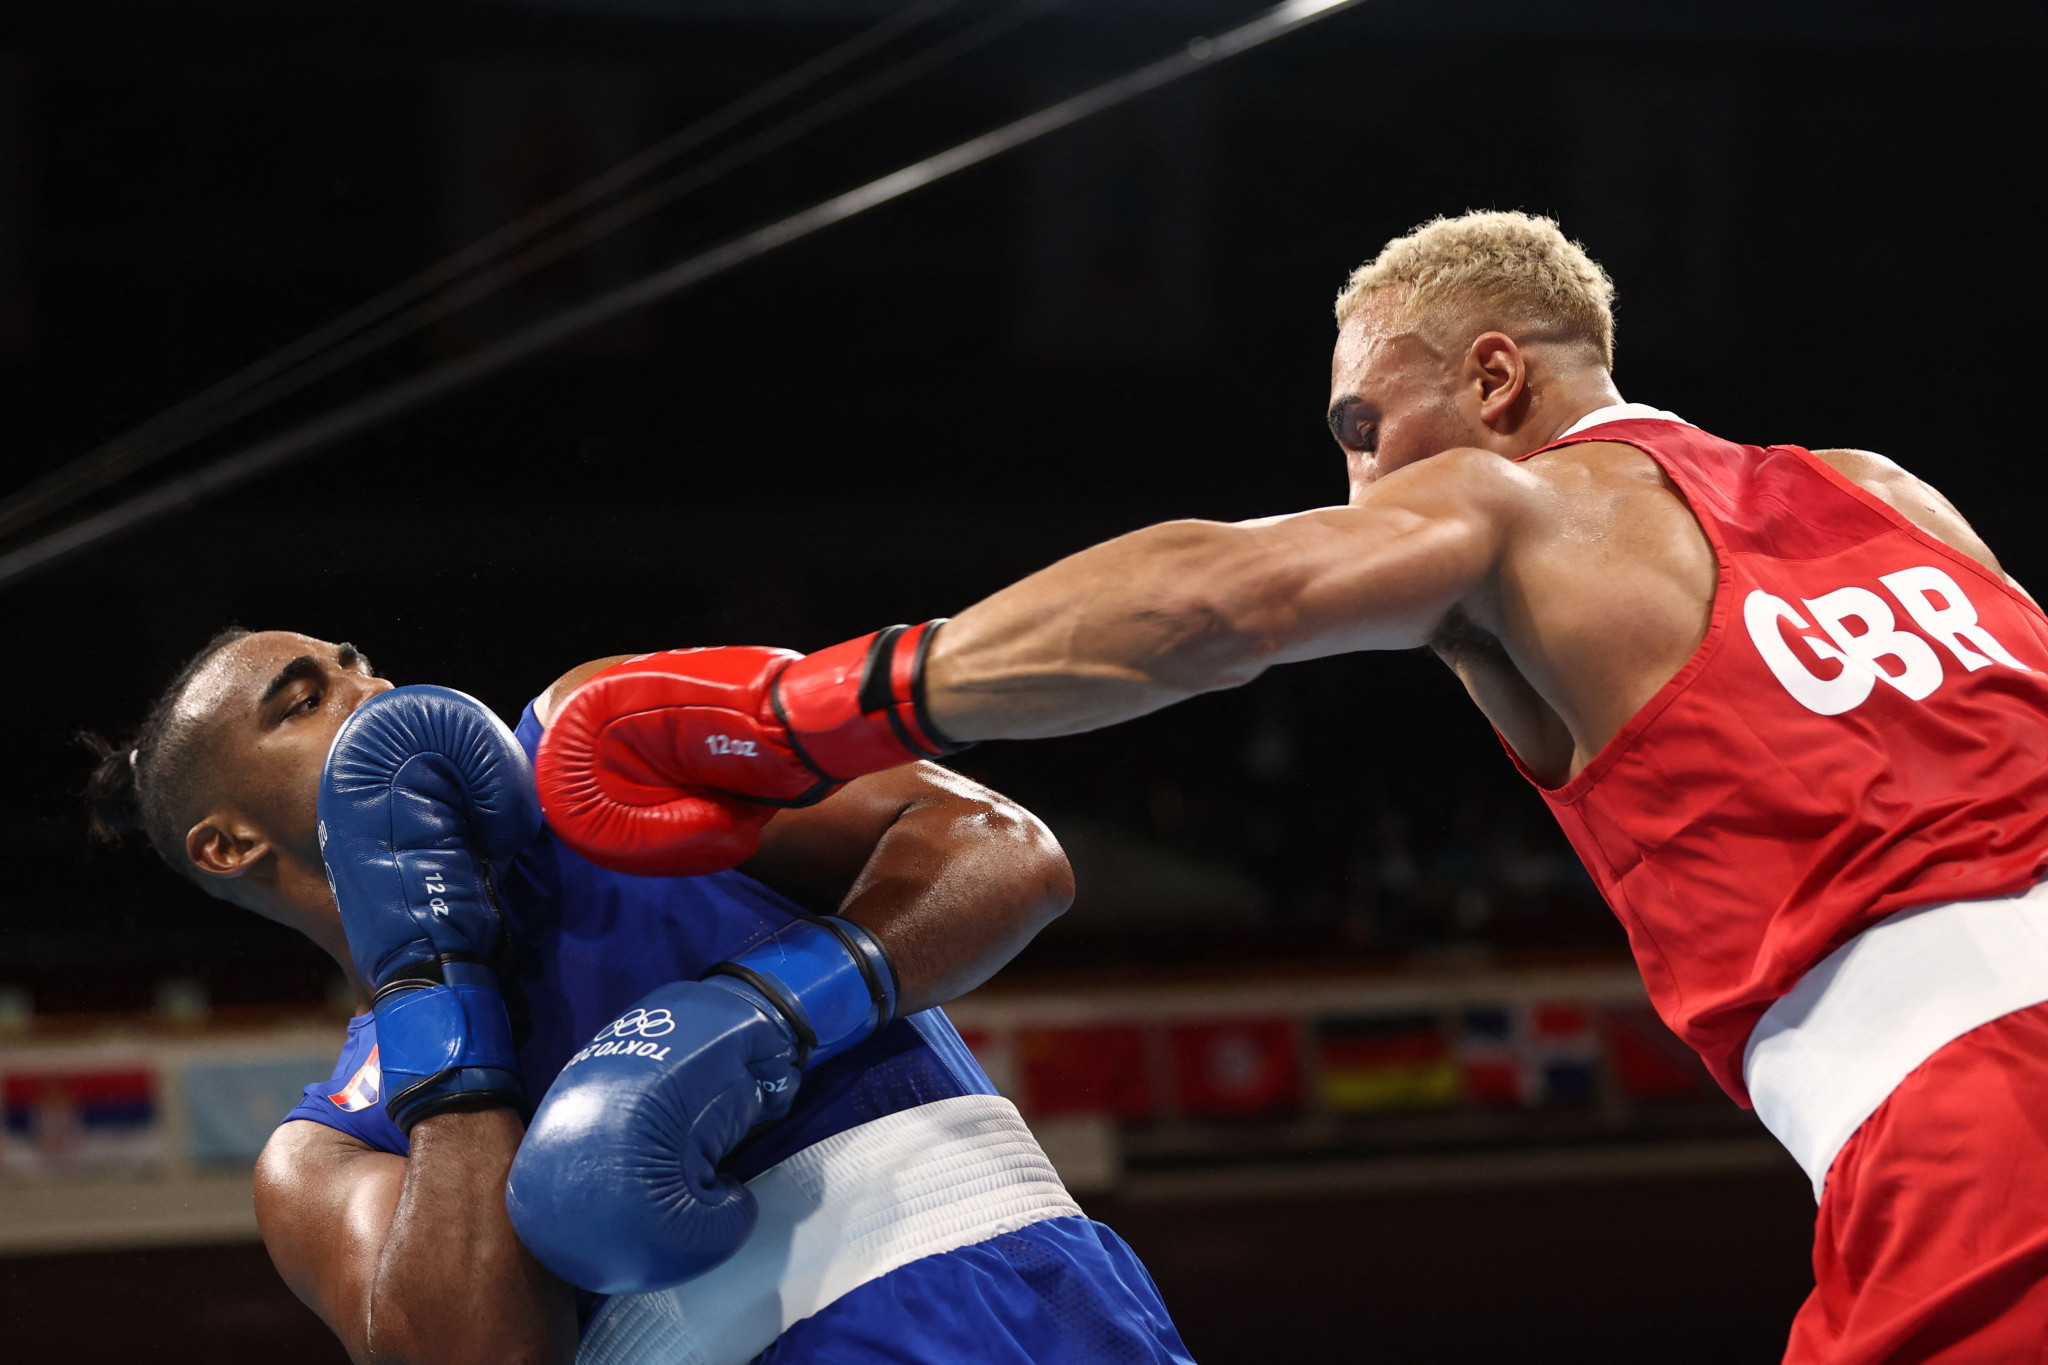 GB Boxing has promised to provide plenty of opportunities for its boxers to prepare for Paris 2024, despite the decision to boycott the IBA Men's World Championhips in Tashkent ©Getty Images